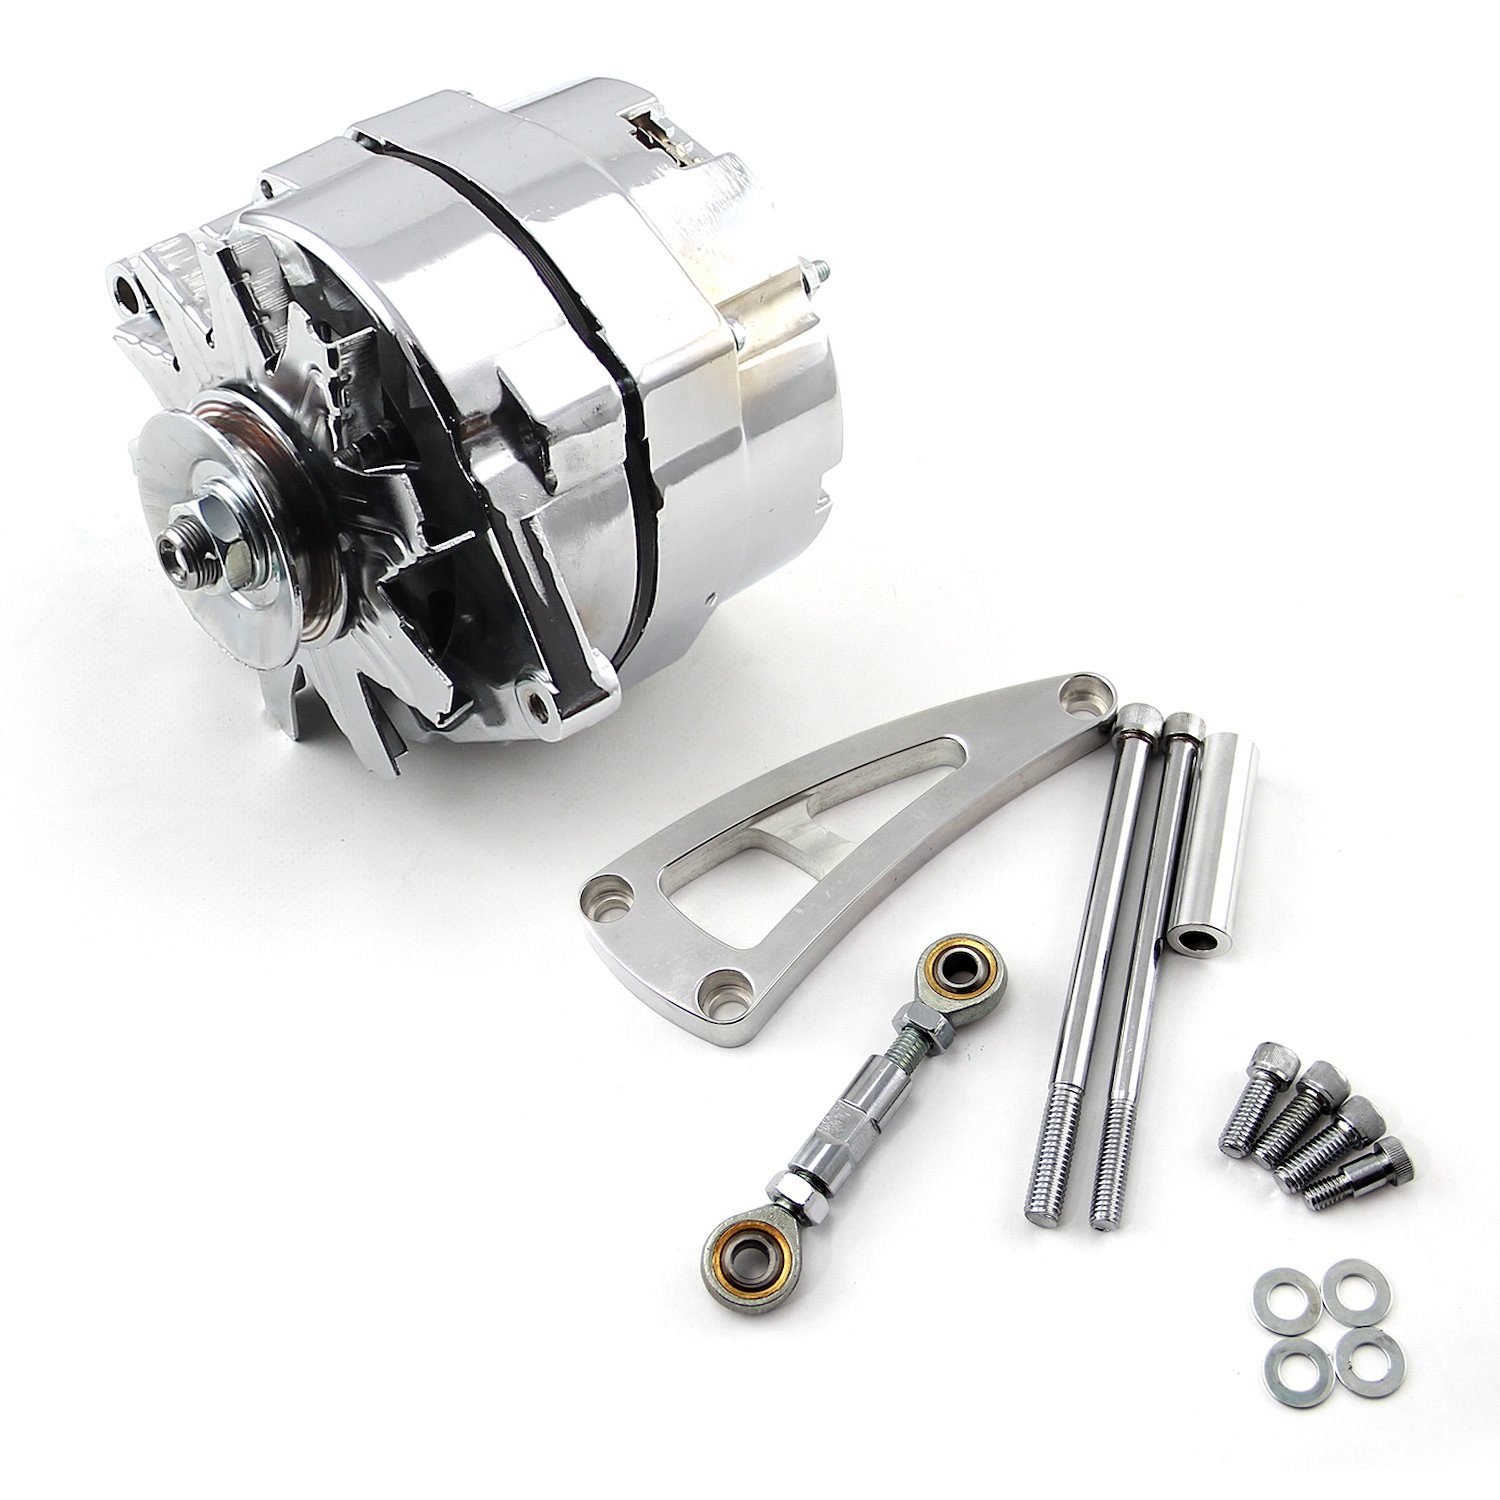 High-Output 3-Wire Alternator & Bracket Kit Big Block Chevy 454 with Long Water Pump